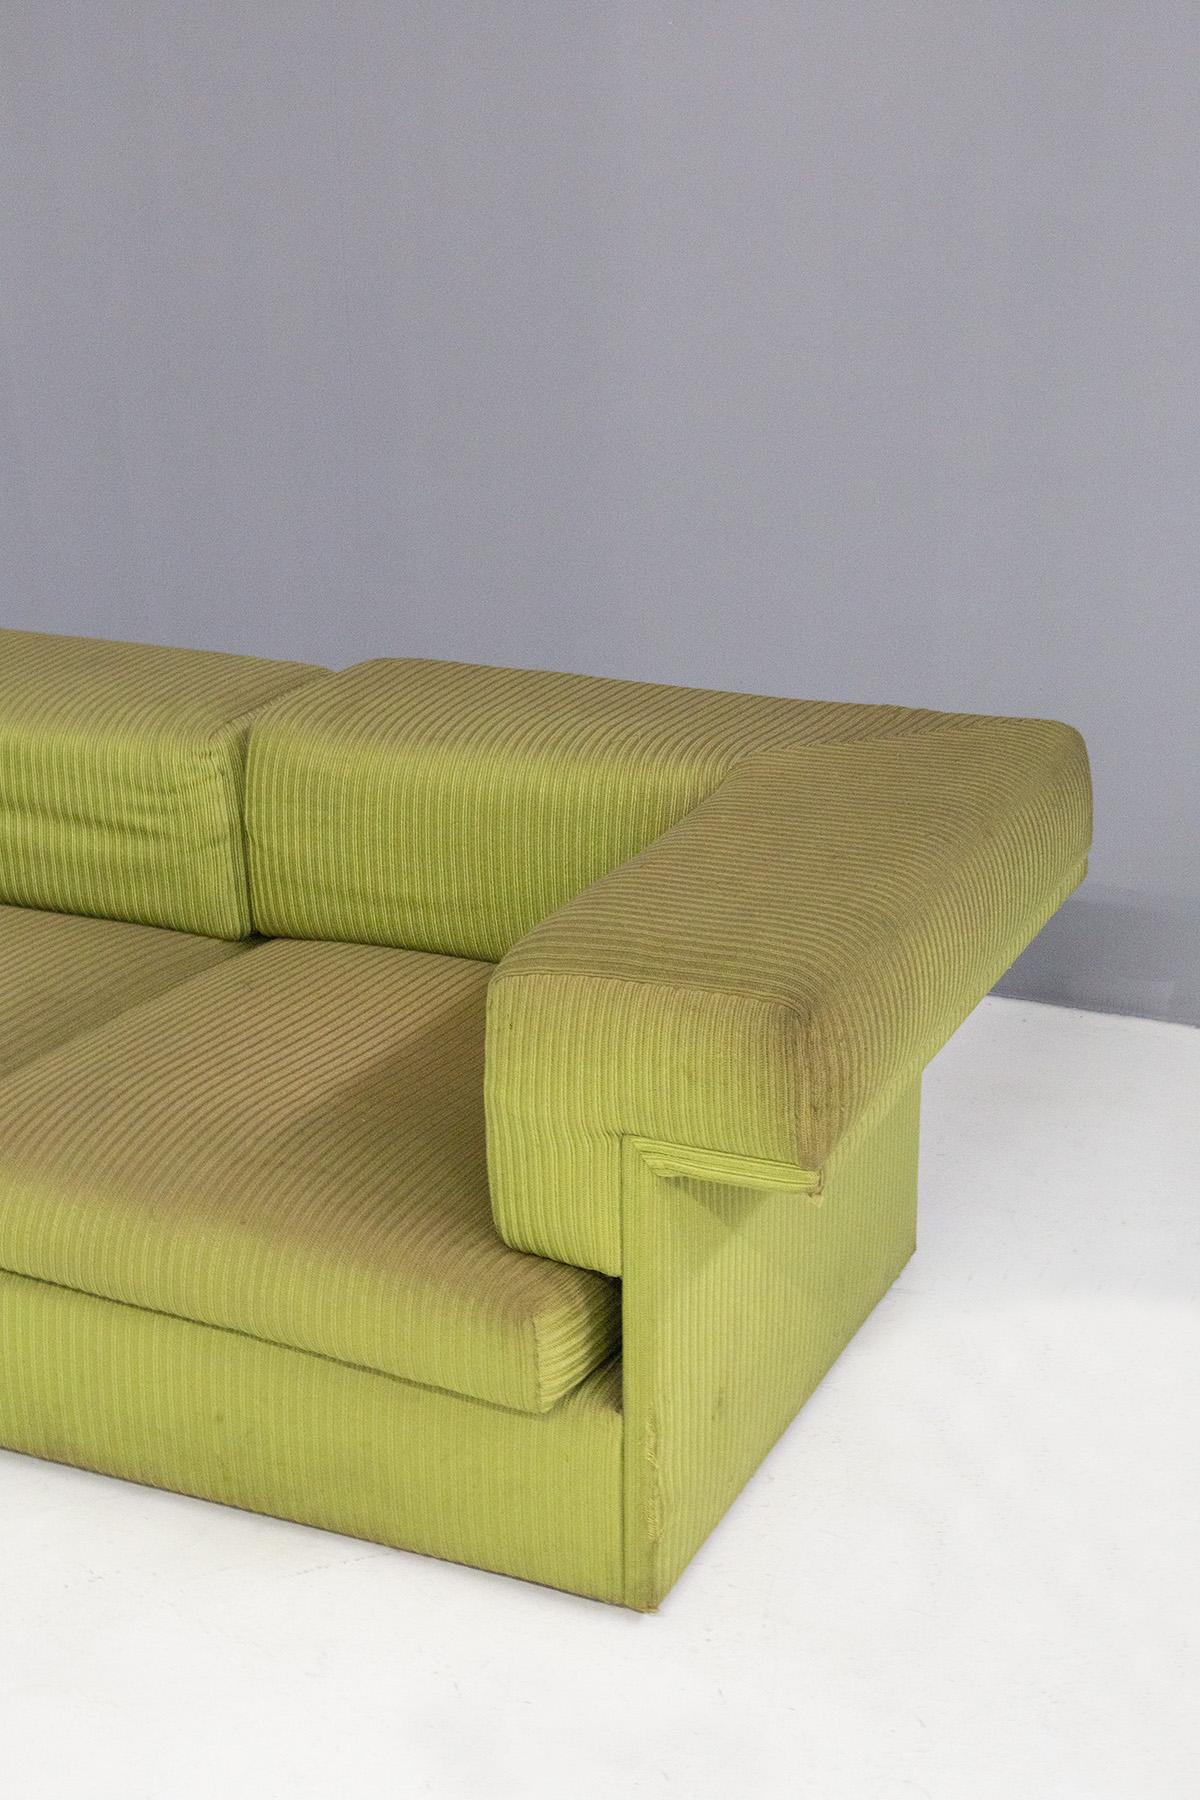 A splendid modular sofa designed in the 1970s and produced by Faleschini.
The modular sofa consists of 5 seating modules, all made of soft green velvet. At the corner there is a module that serves as a connection between the other modules of the